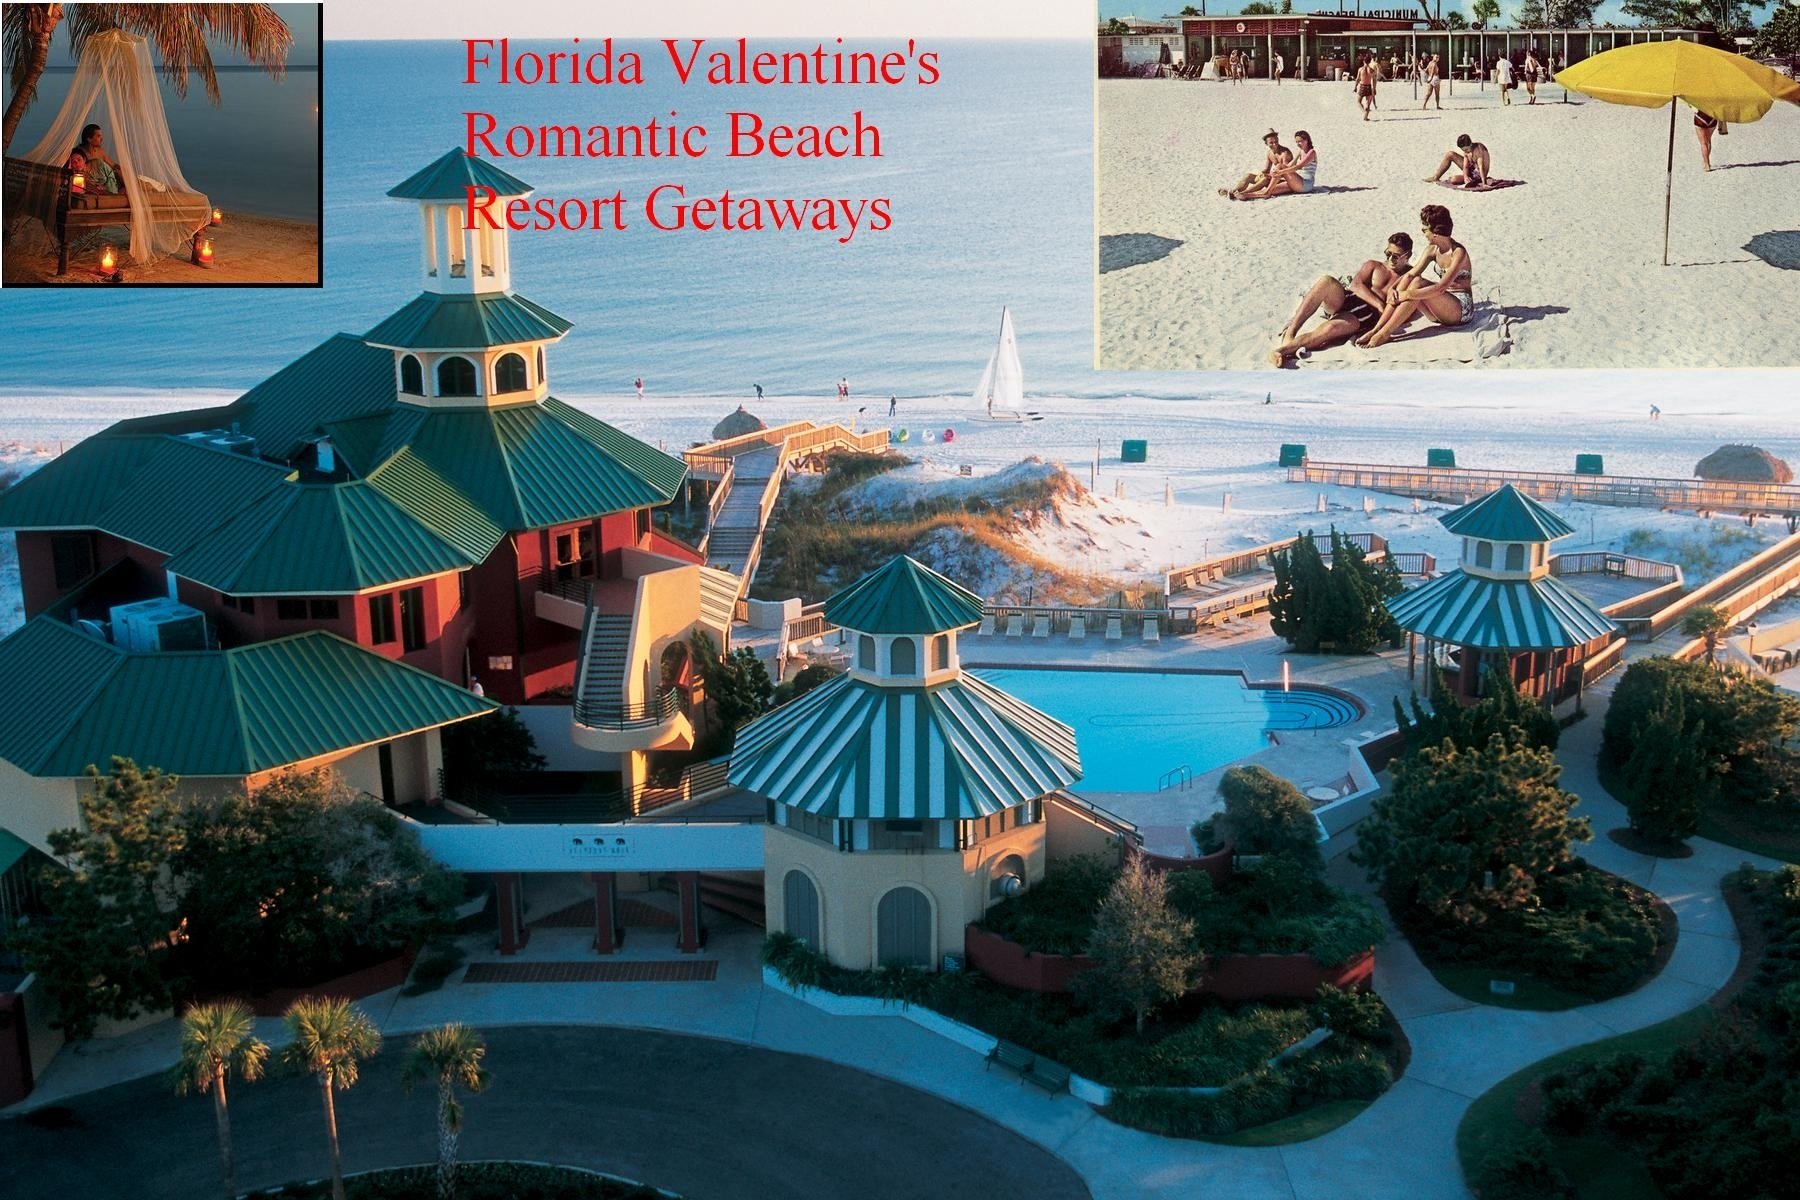 10 Elegant Weekend Vacation Ideas For Couples romantic places for valentines day startupcorner co 2022